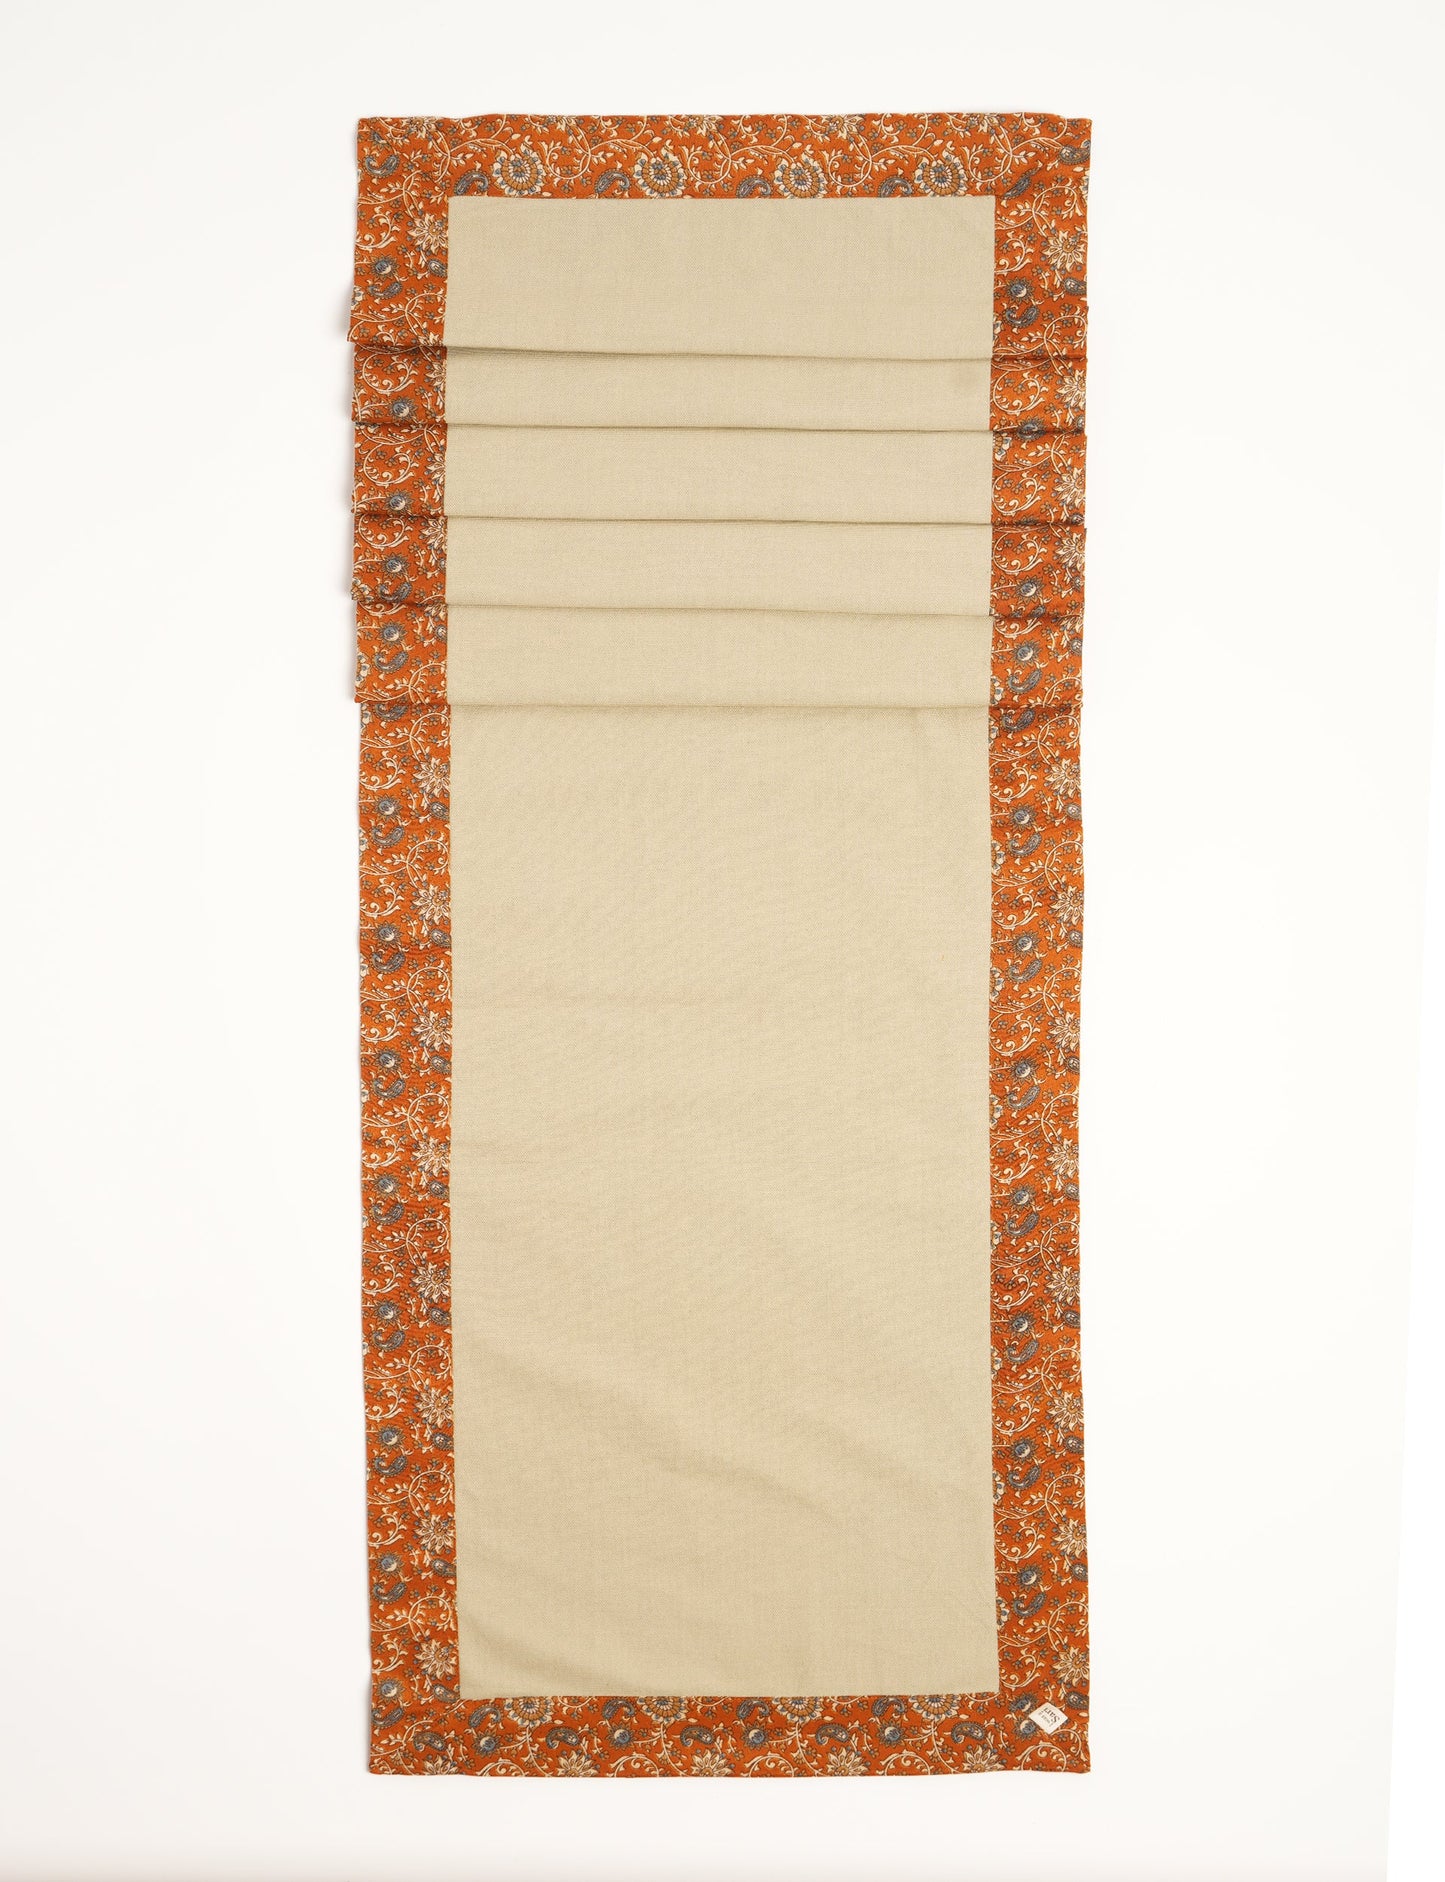 Crafted with care, our 160x40 cm reversible table runner is a blend of 100% cotton canvas and upcycled sari fabric. Ethical, green, and designed for sustainability, this piece adds a unique touch to your dining setup, sparking conversations about eco-friendly living.